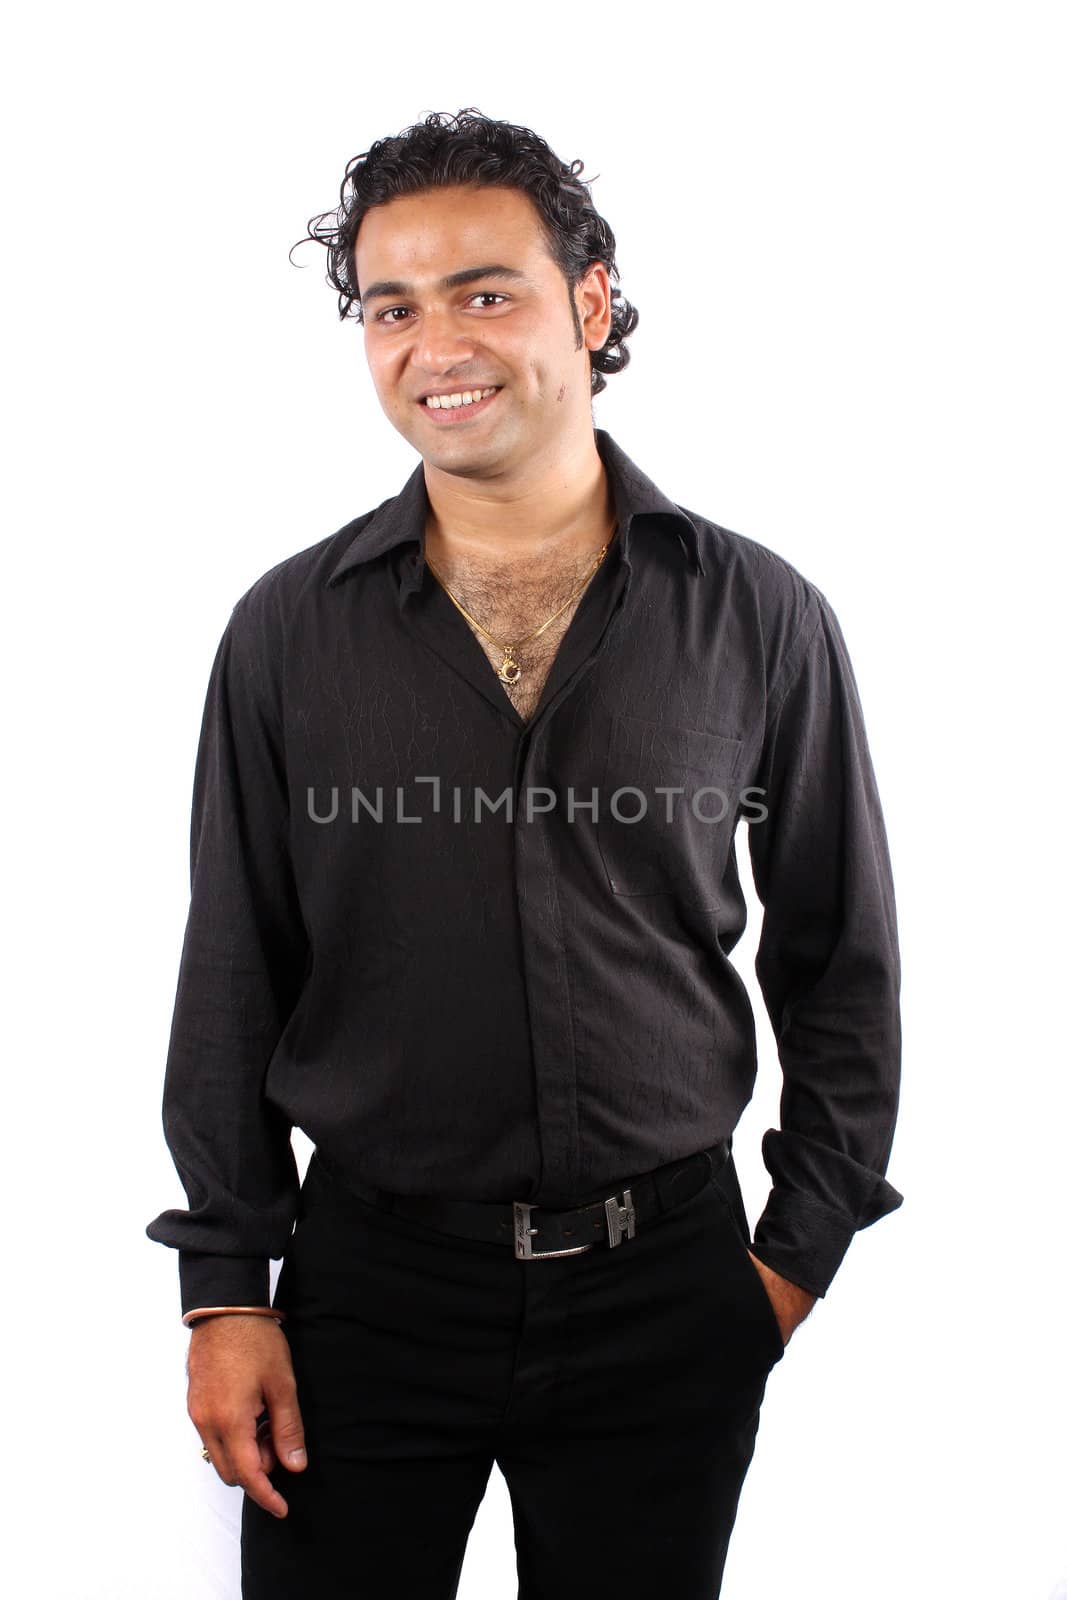 A young Indian male model, on white studio background.